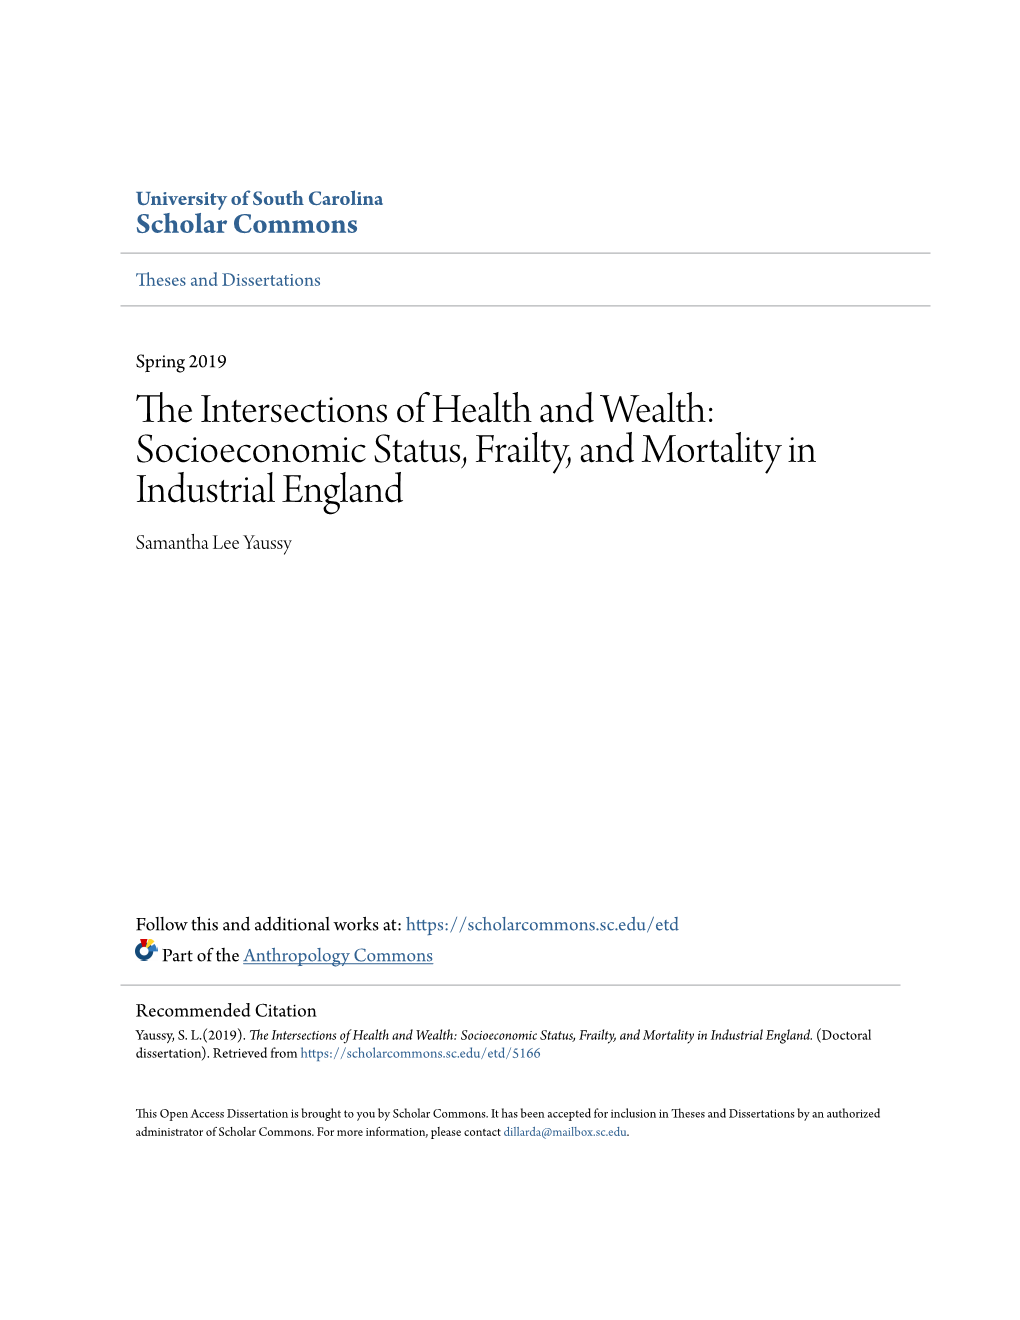 Socioeconomic Status, Frailty, and Mortality in Industrial England Samantha Lee Yaussy